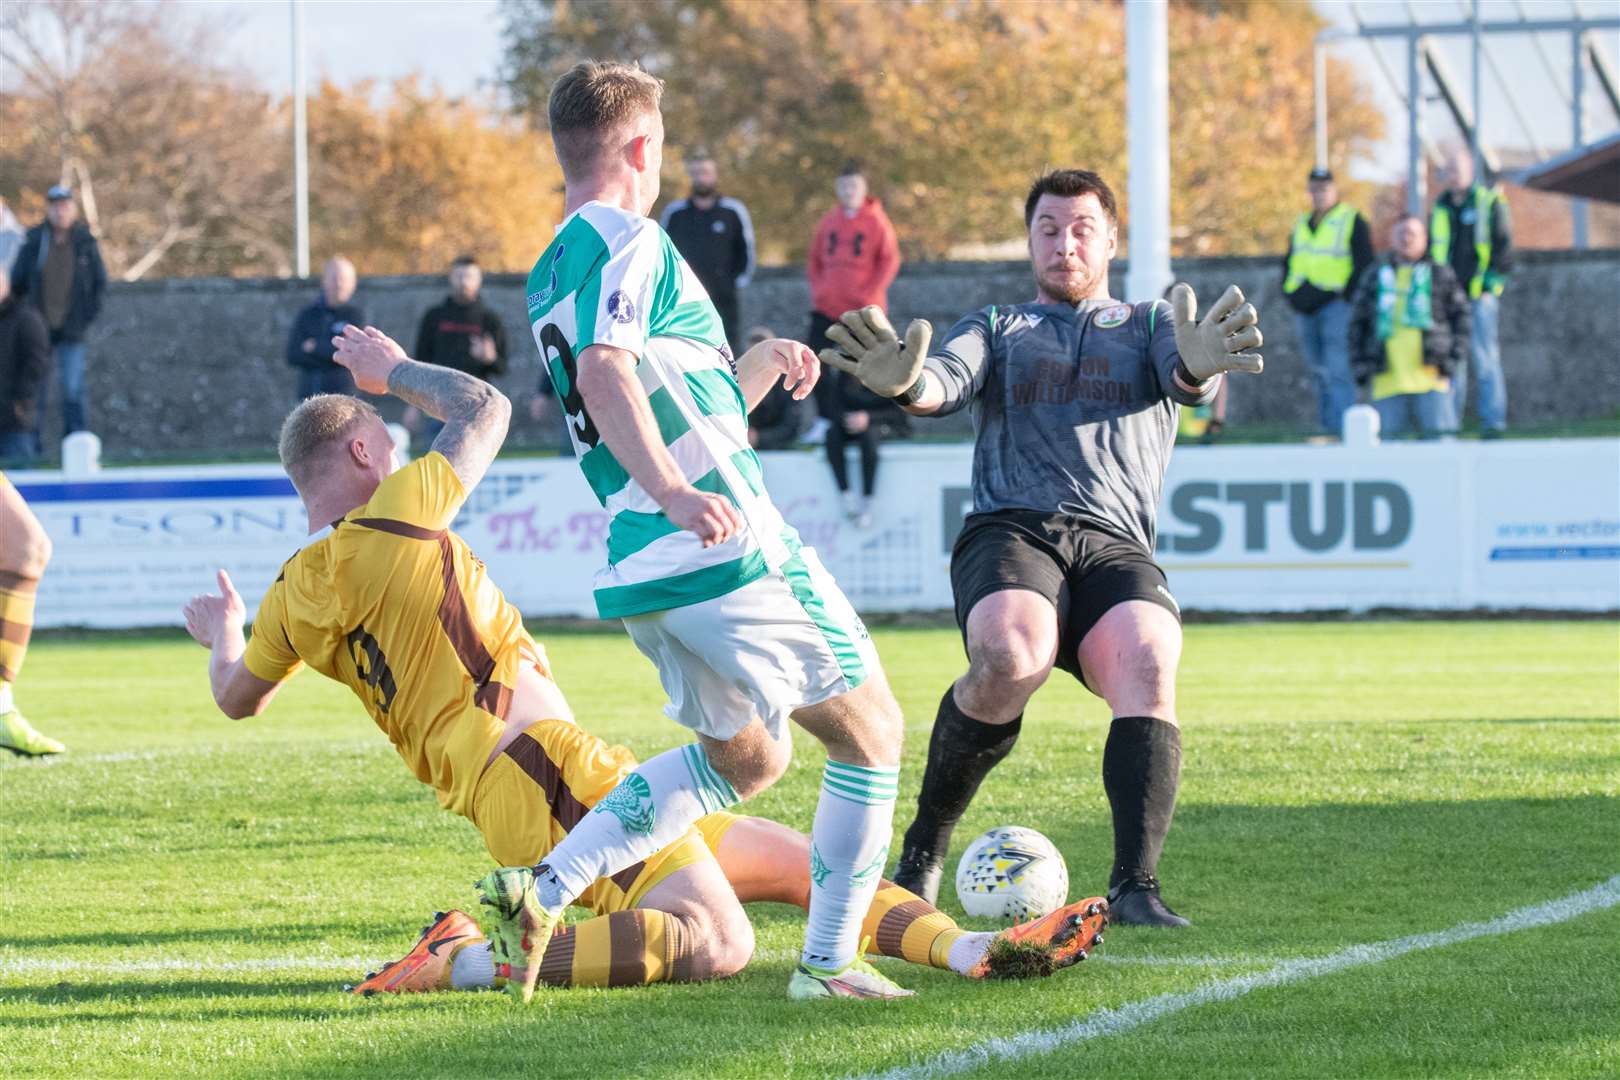 Forres Mechanics' keeper saves well from Buckie forward Josh Peters - as Forres centre back Lee Fraser slides in for a challenge too...Buckie Thistle FC (2) vs Forres Mechanics FC (0) - Highland Football League 22/23 - Victoria Park, Buckie 29/10/2022...Picture: Daniel Forsyth..